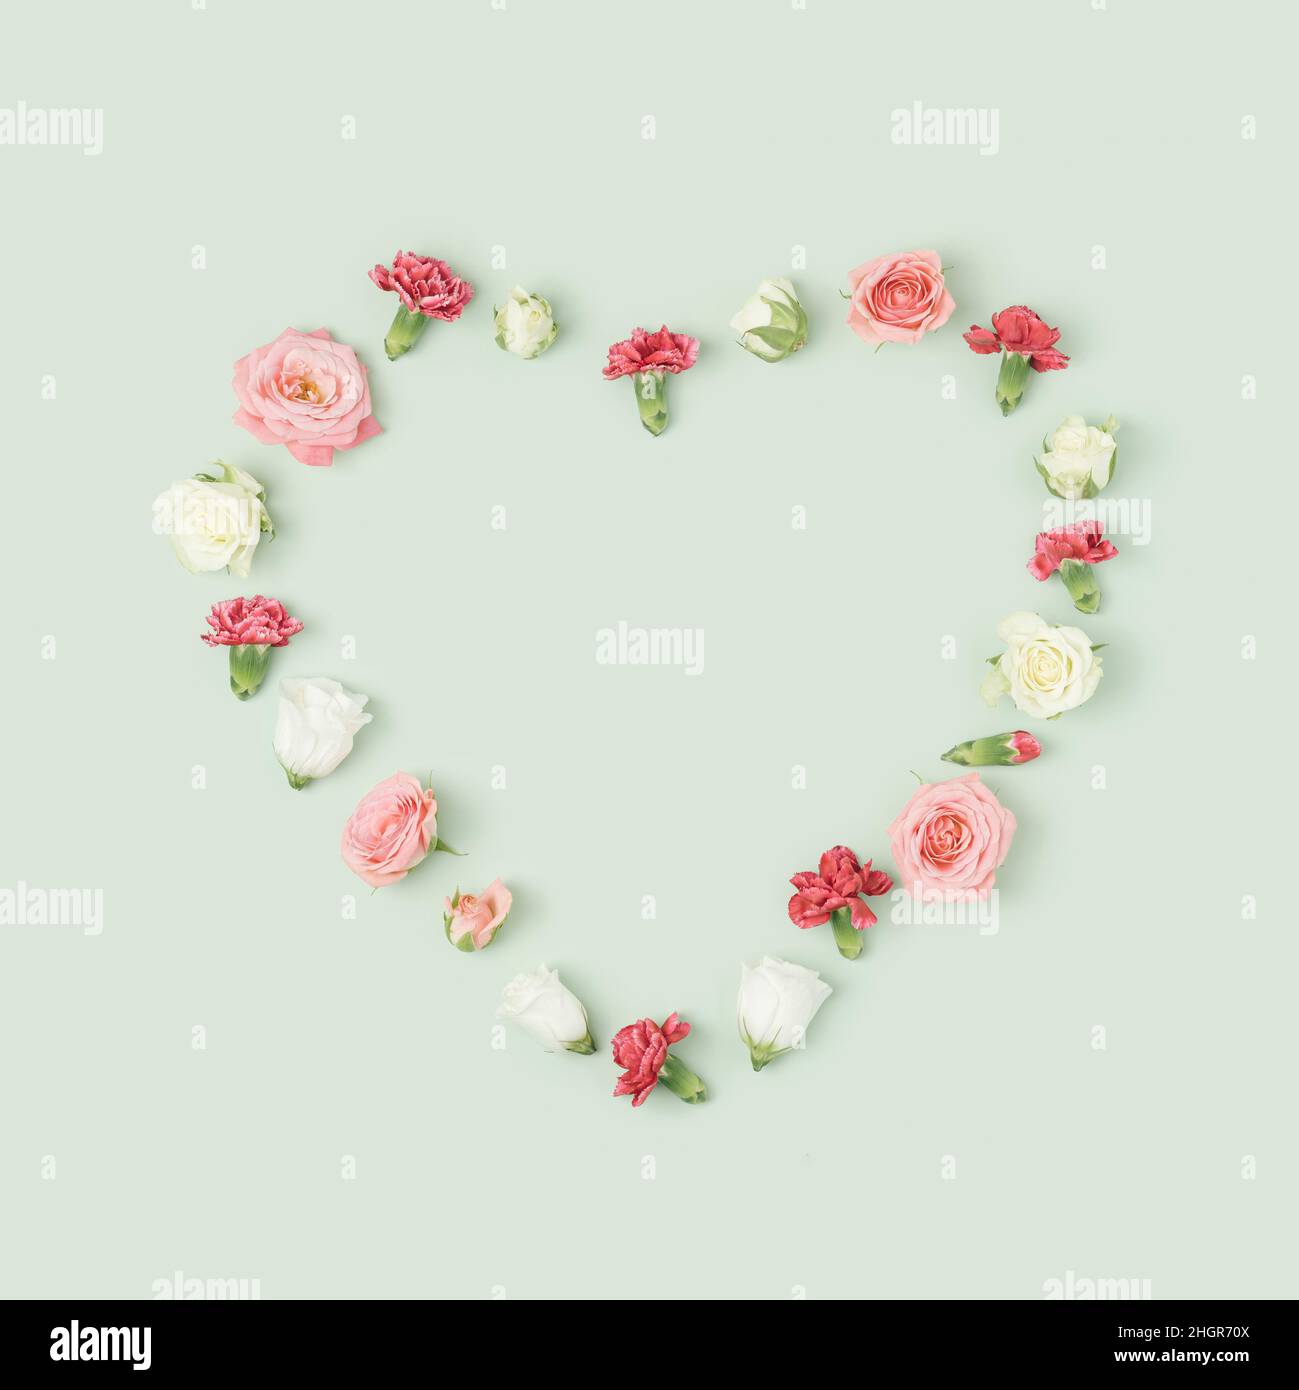 Various colorful spring flowers heart layout on a light green background. Valentine's day minimal concept. Stock Photo